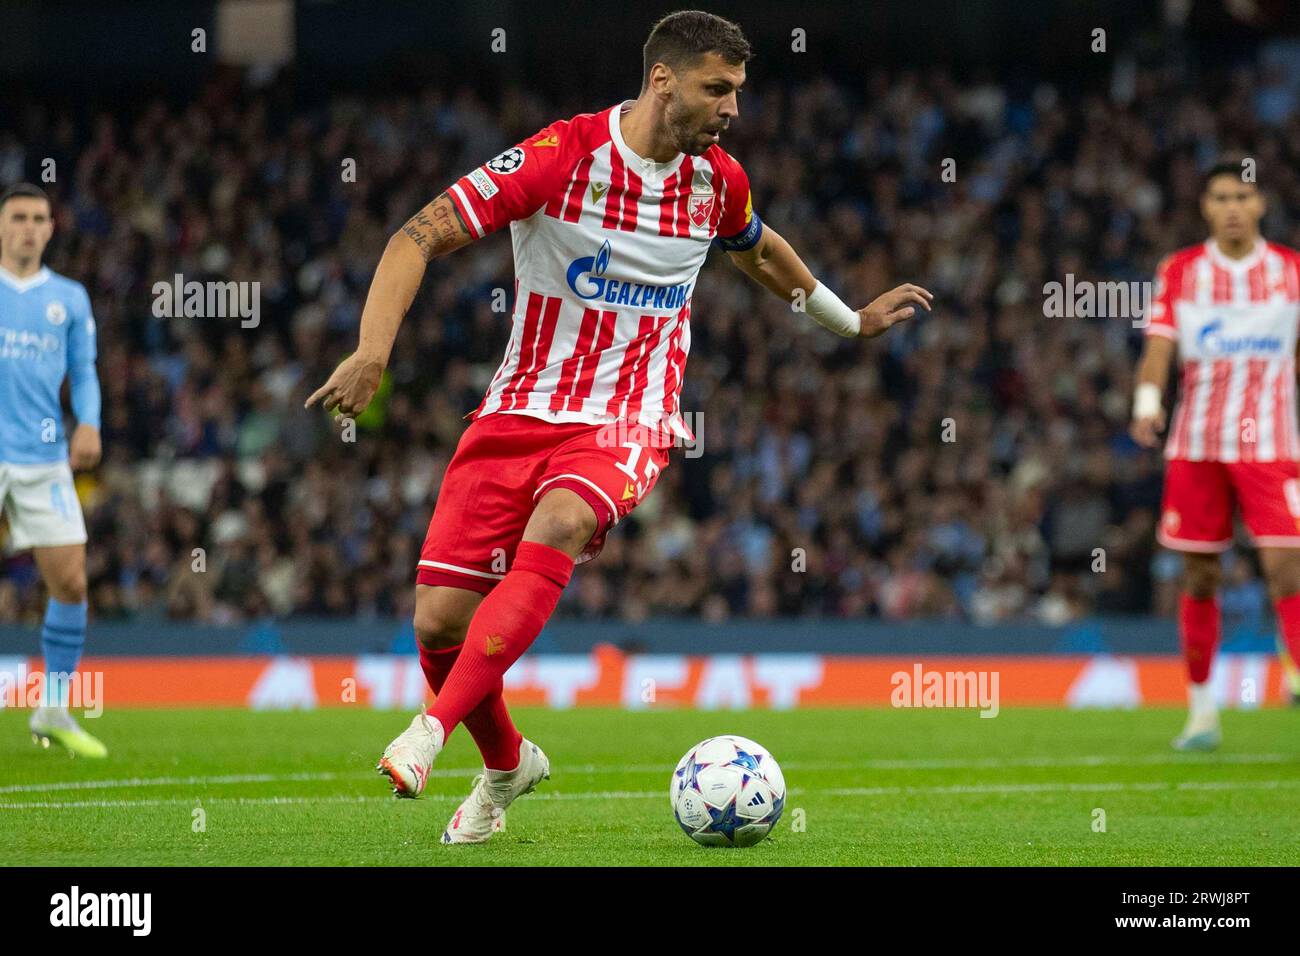 Aleksandar Dragovic #15 of Crvena zvezda during the UEFA Champions League  Group G match between Manchester City and FK Crvena Zvezda at the Etihad  Stadium, Manchester on Tuesday 19th September 2023. (Photo